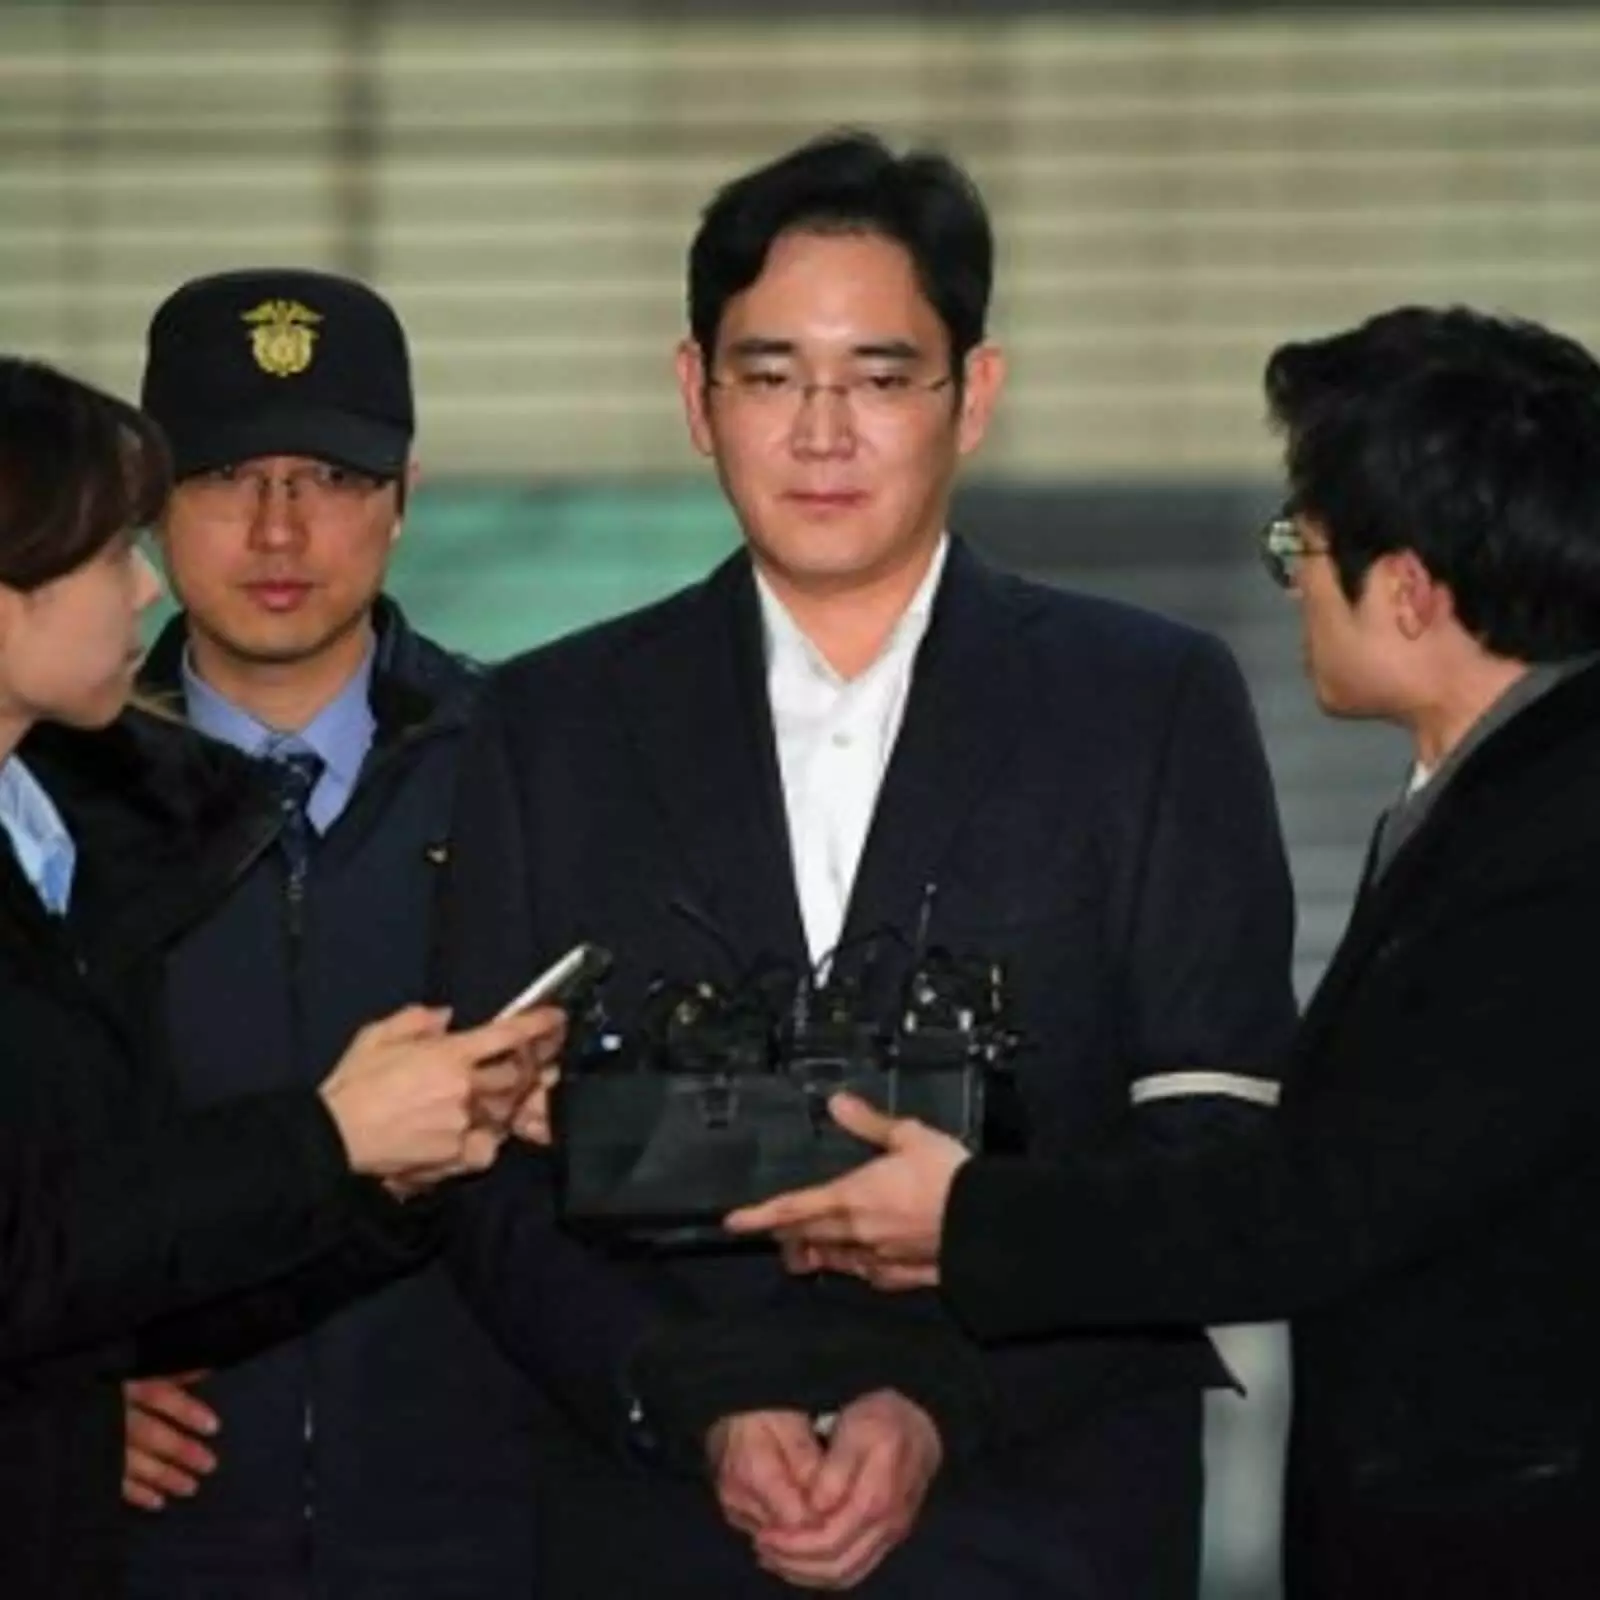 samsung group boss lee jae yong gets presidential pardon who found guilty of bribery embezzlement